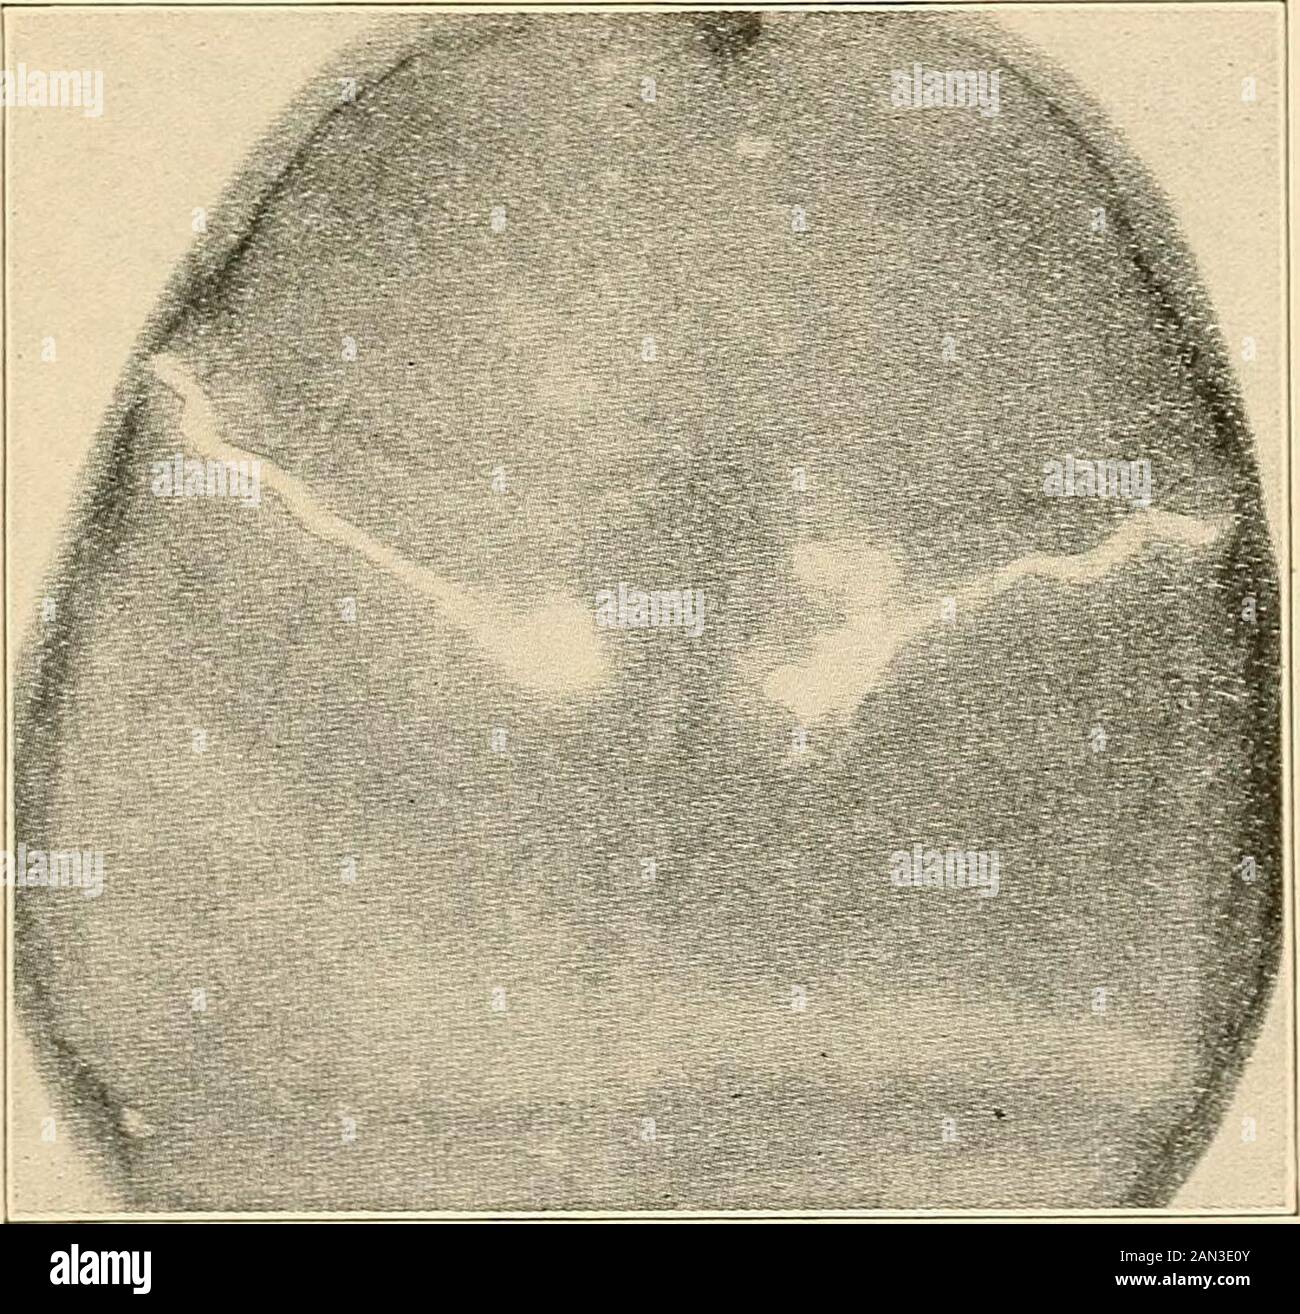 Roentgen diagnosis of diseases of the head . he skull(through the right foramen parietale) and in the diploe, in thecase of a large tumor of the right cerebral hemisphere which 21In one of the cases demonstrated to us by Barany, there existed a mastoid emis-sary on the right Mile the size of the little linger. From this a very plainly visible andpalpable vein made its exit, pulsating synchronously with the systole. INTRACRANIAL DISEASES 231 had eroded the inner surface of the skull. Smith referred to thefact that, in the people of the Balkan peninsula, the retrobreg-matic Pacchionian grooves a Stock Photo